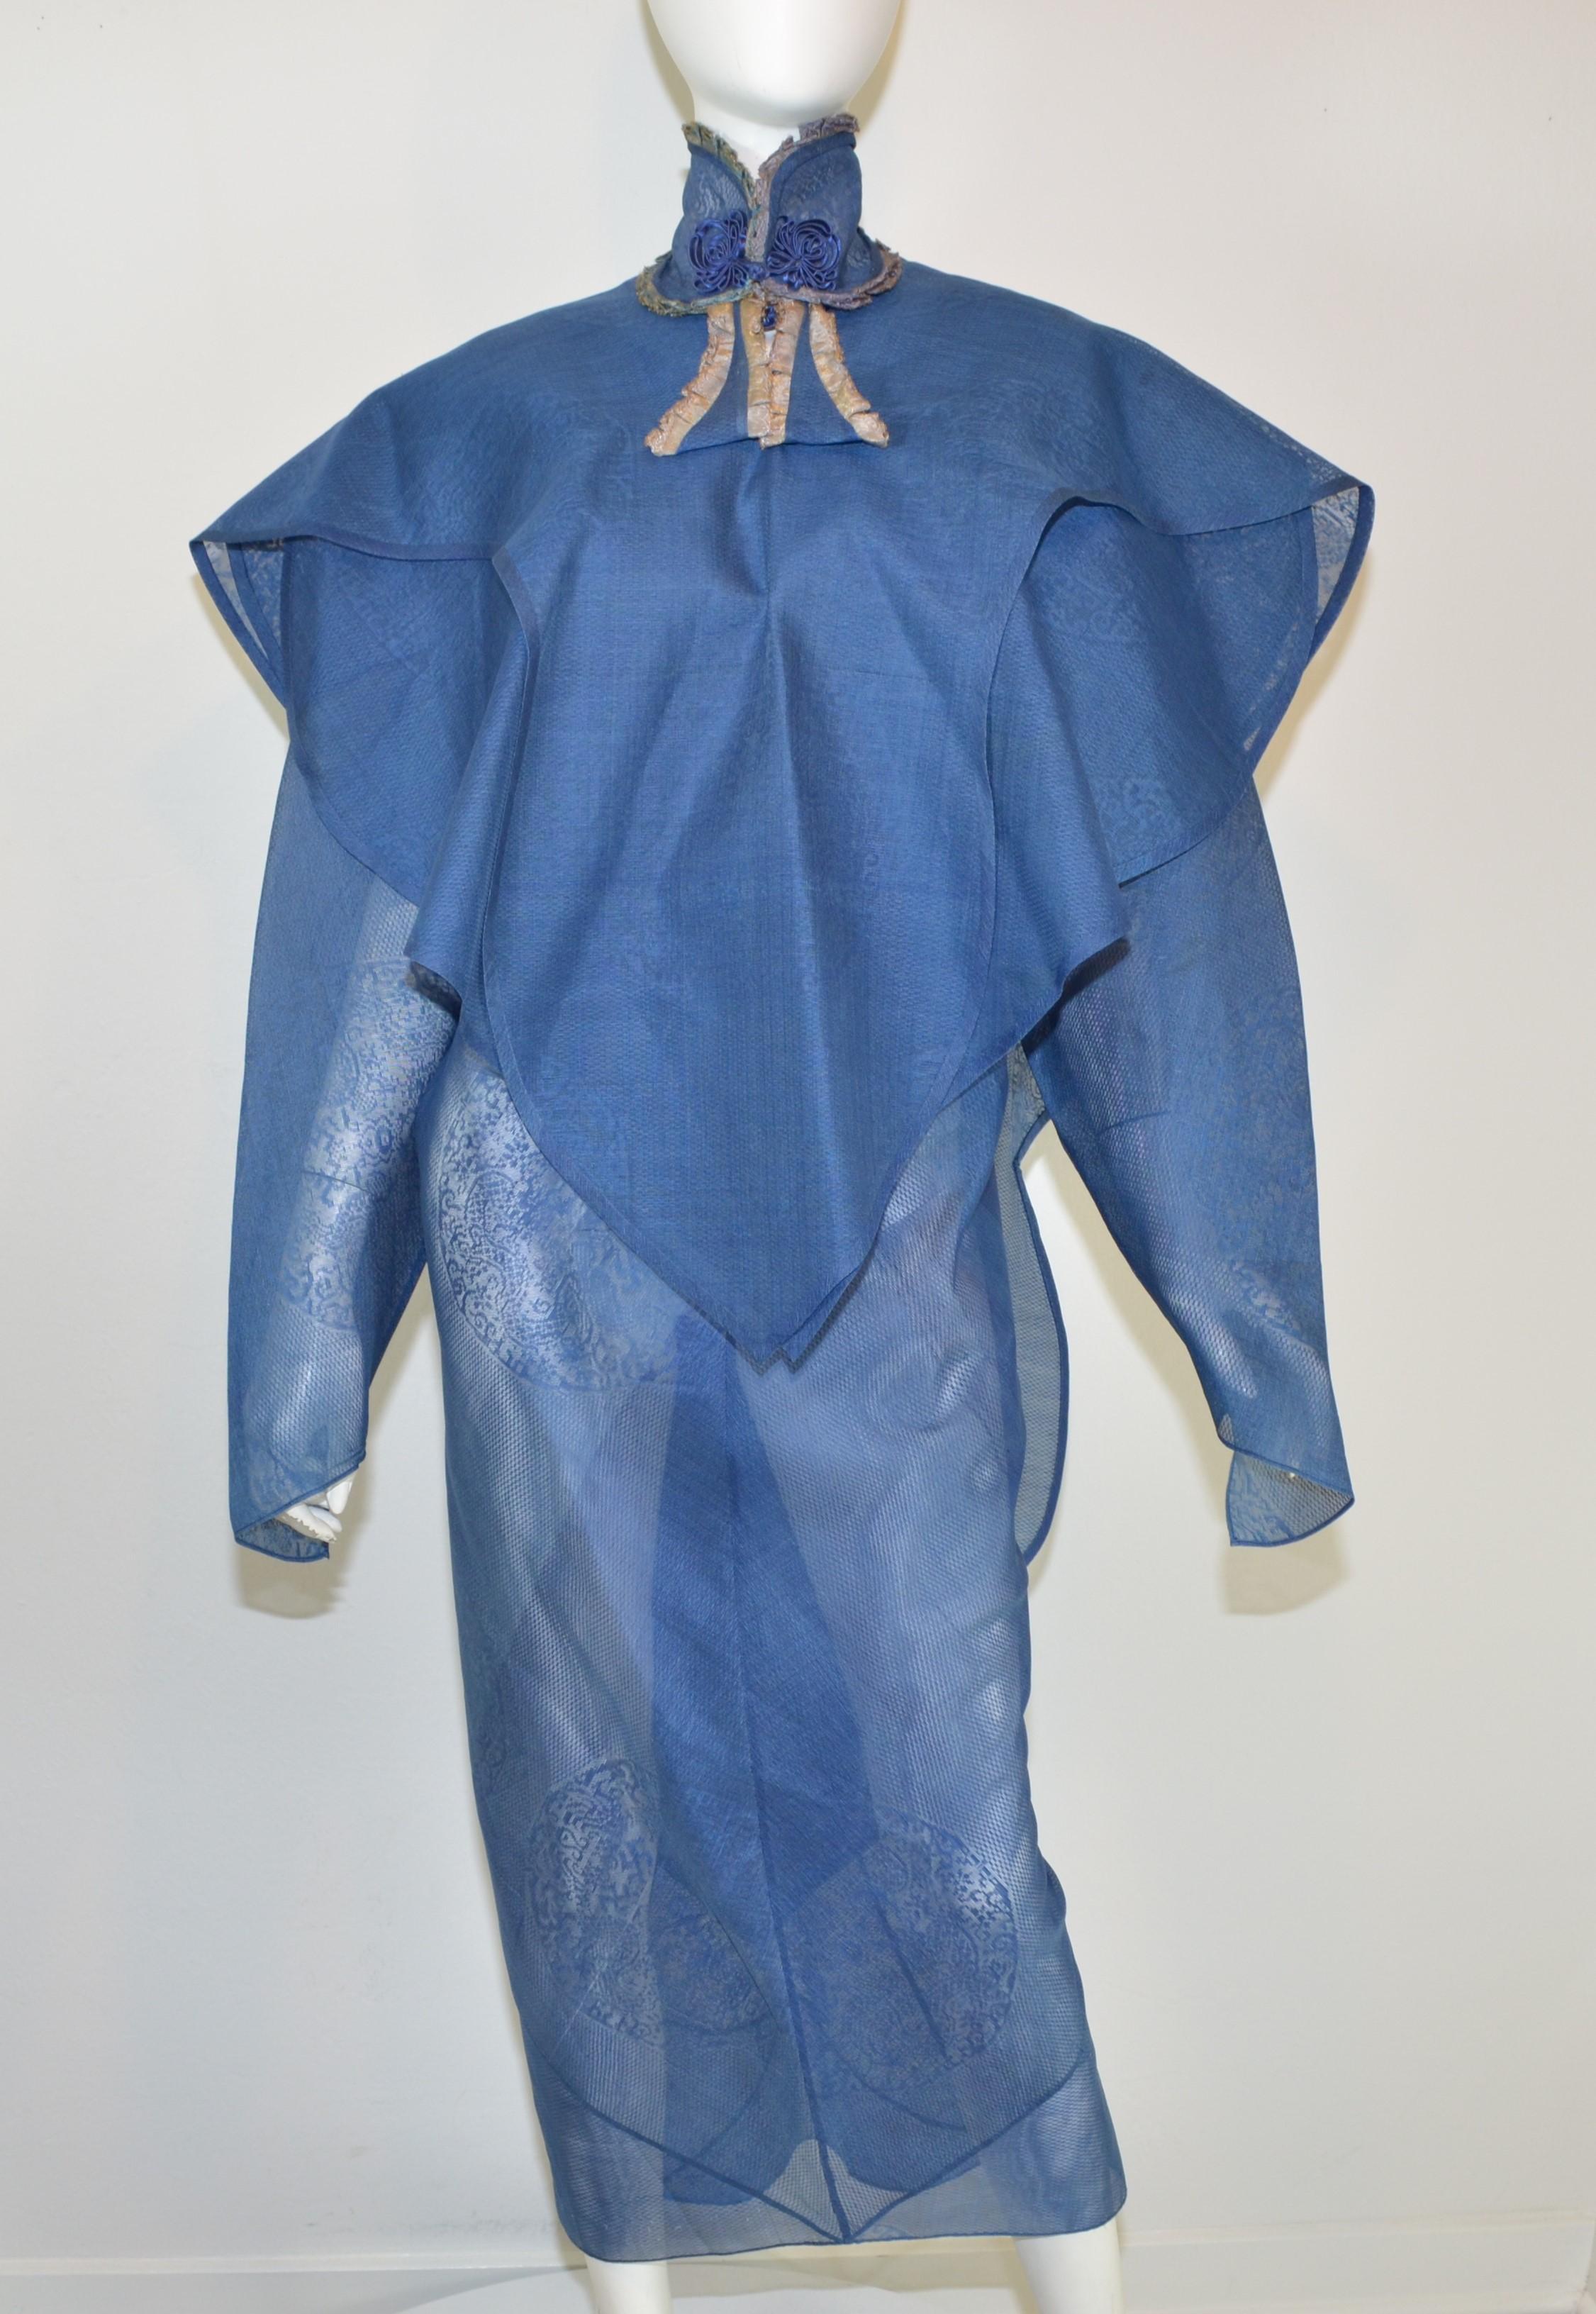 This ensemble is featured in a blue organza jacquard fabric and has several layers as pictured ( dress, 2 apron layers, and a neck piece.) Dress (which is the base layer) has embroidered frog closure buttons at the opening of the neck, cutout detail